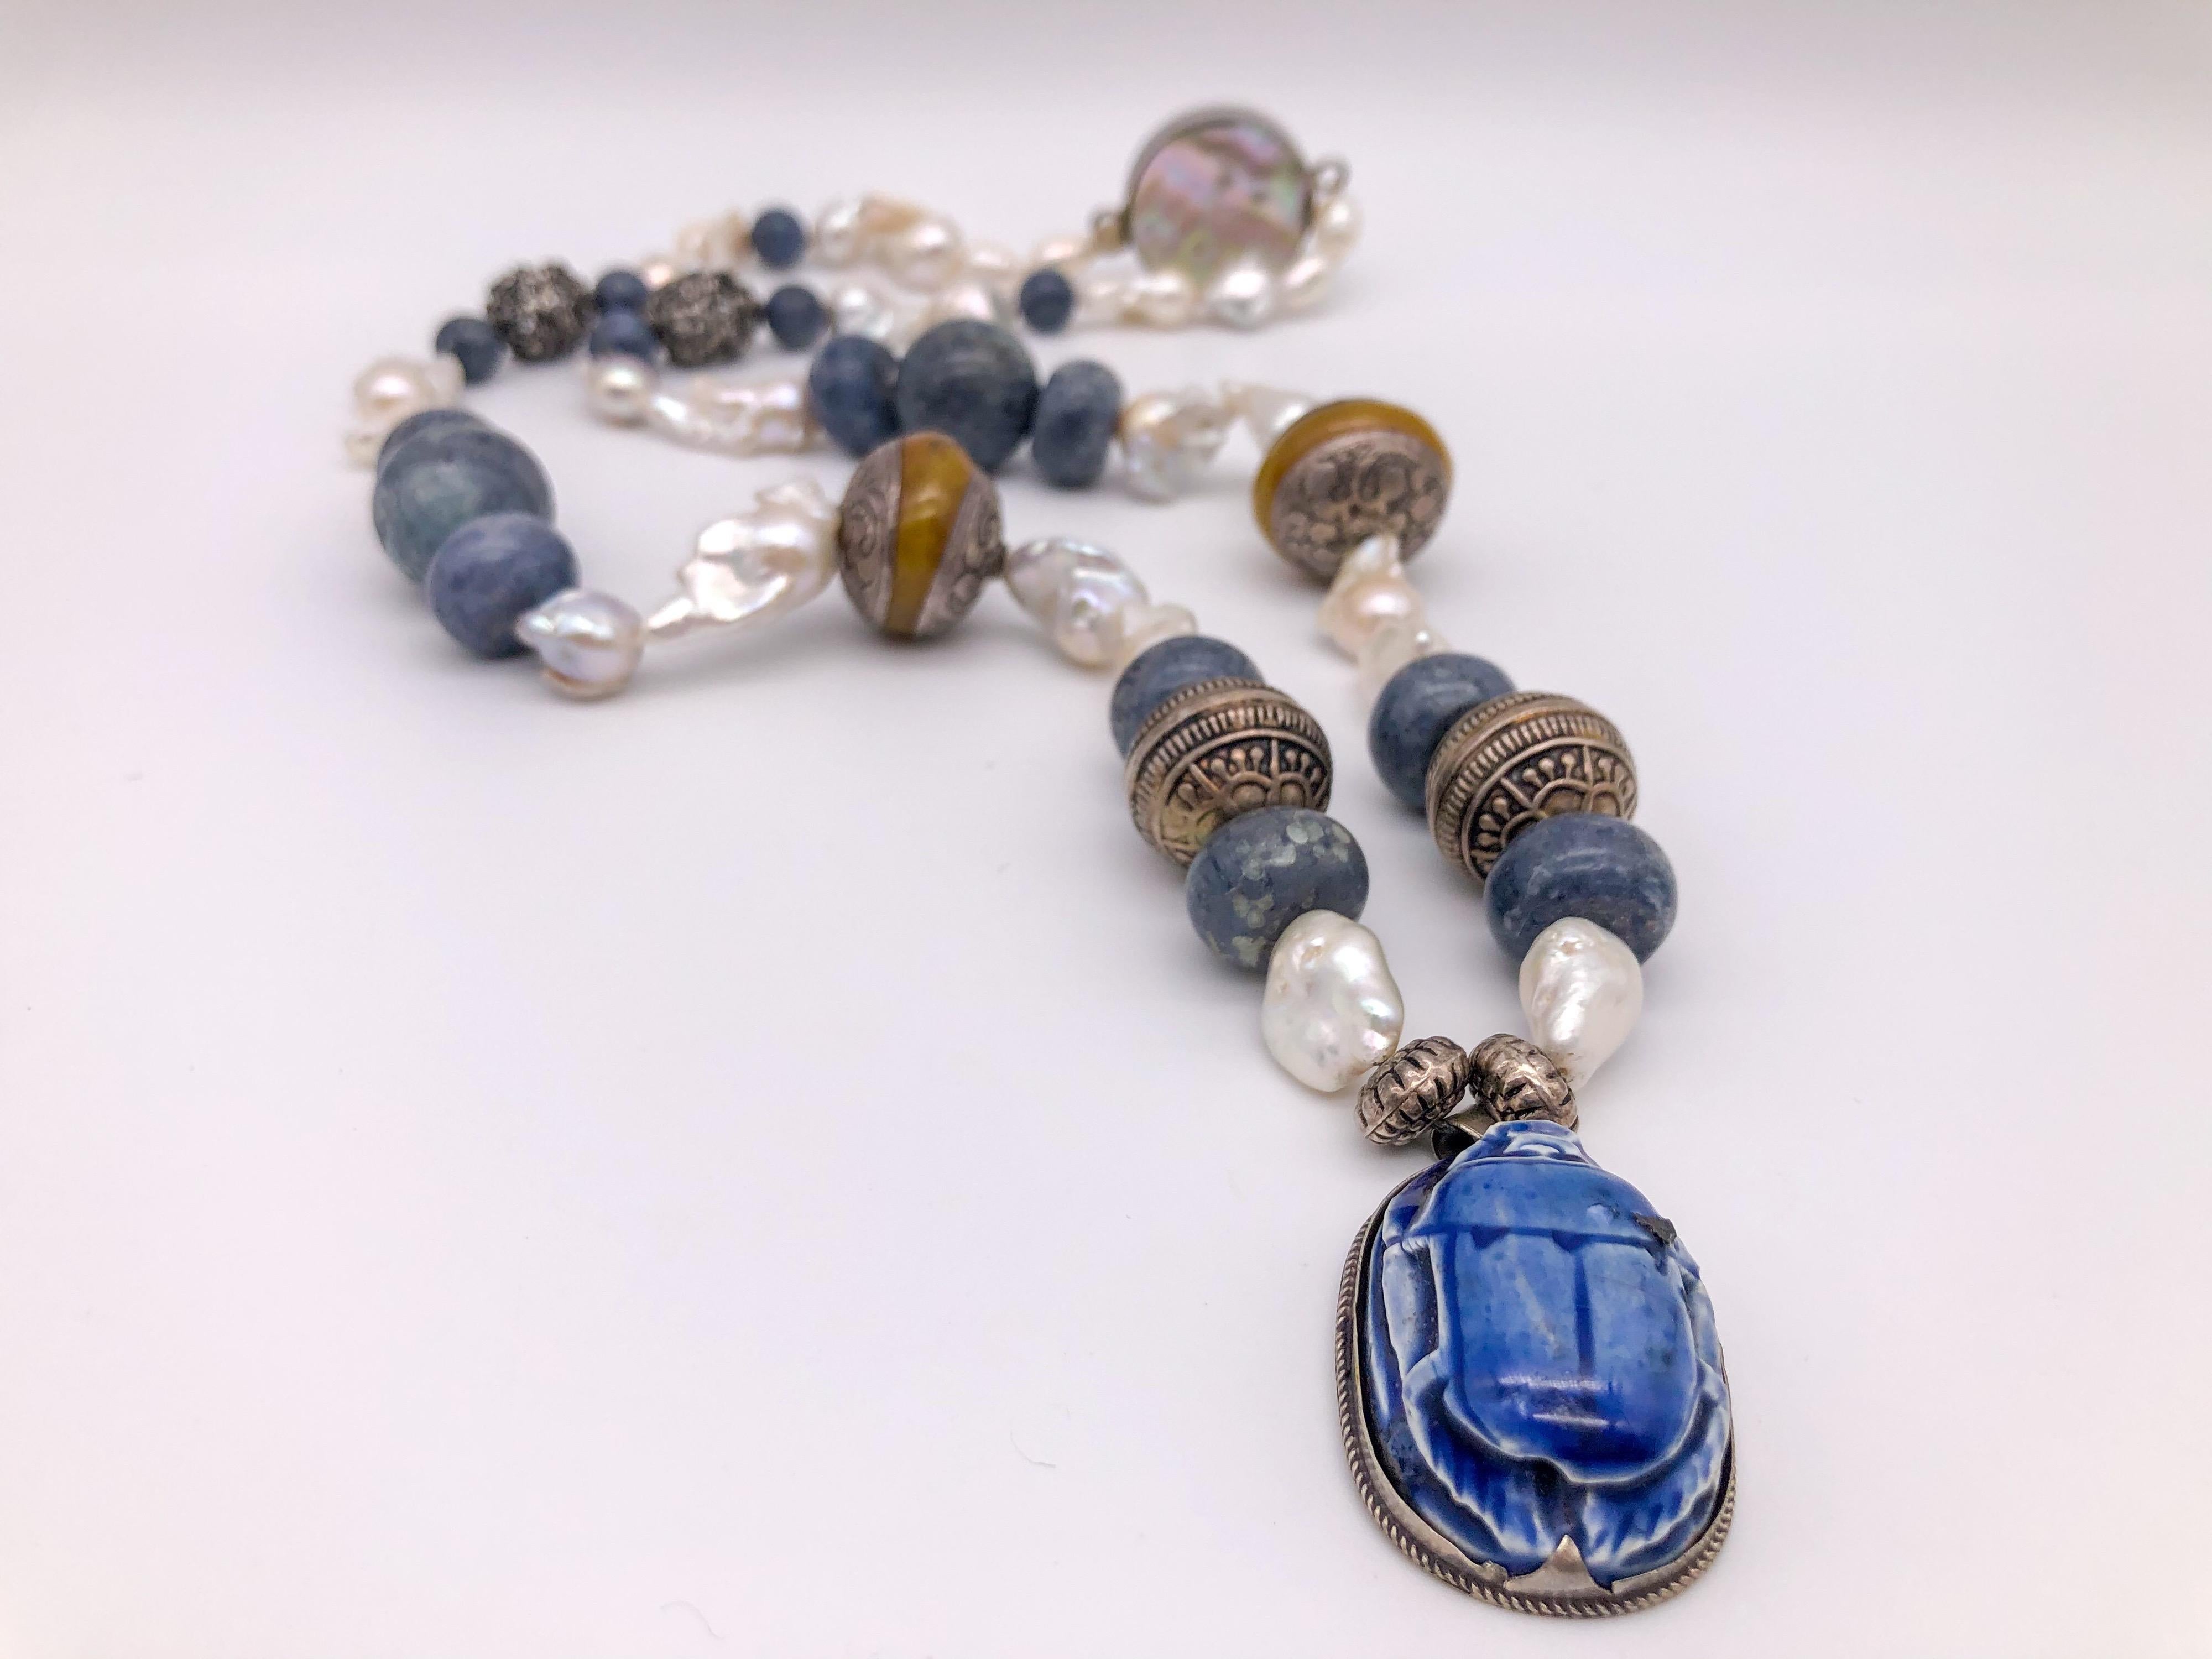 One-of-a-Kind
This 30” long necklace is an embarrassment of treasures. Let us start with the symbol of rebirth ( fresh hope) the large ceramic scarab, next to a pair of heavily embossed Sterling Silver beads, followed by a pair of Tibetan silver and